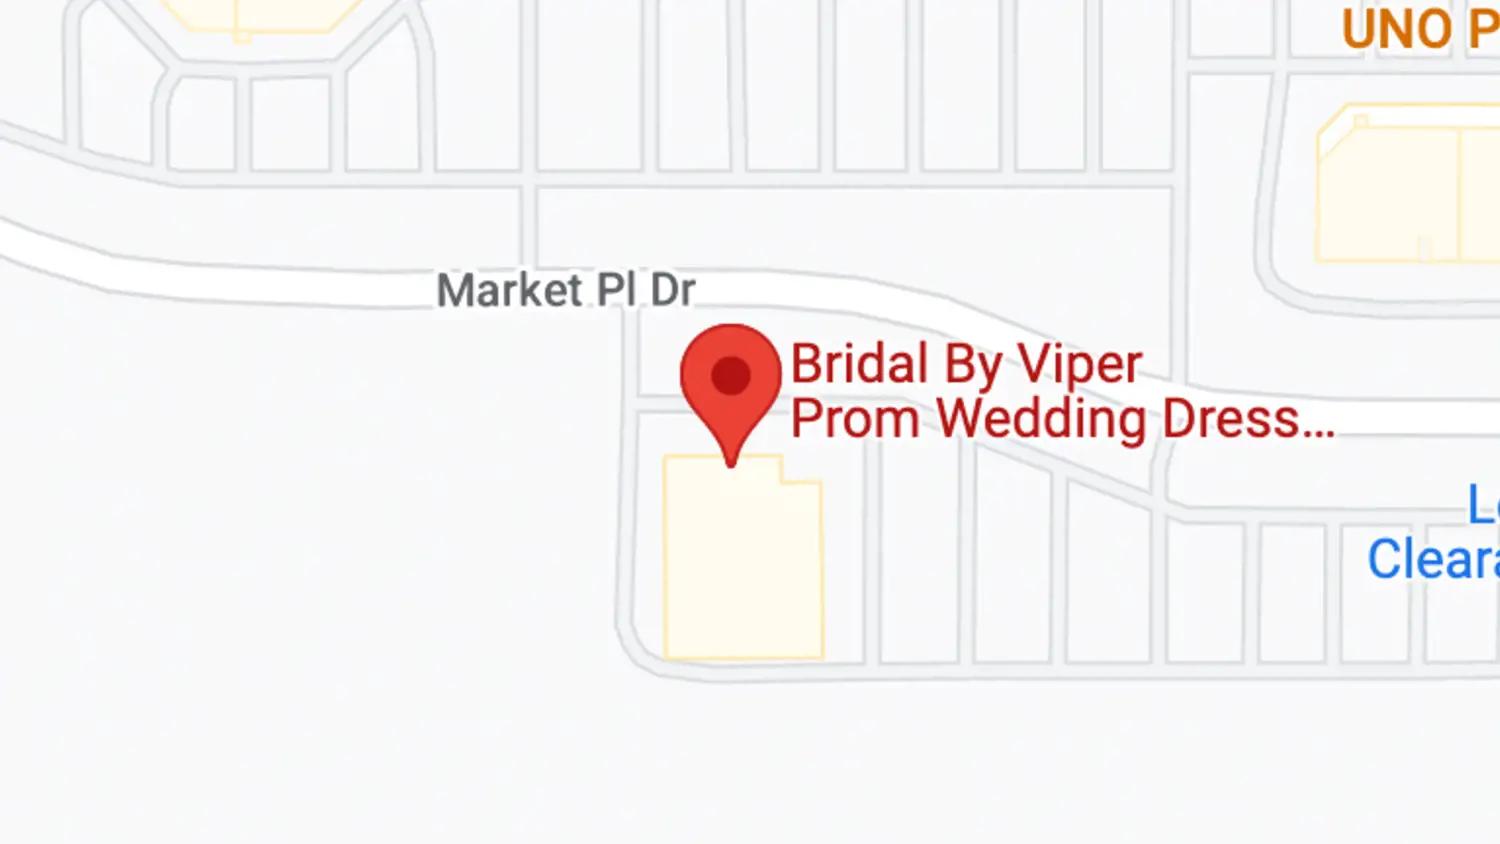 Bridal by Viper location. Mobile image